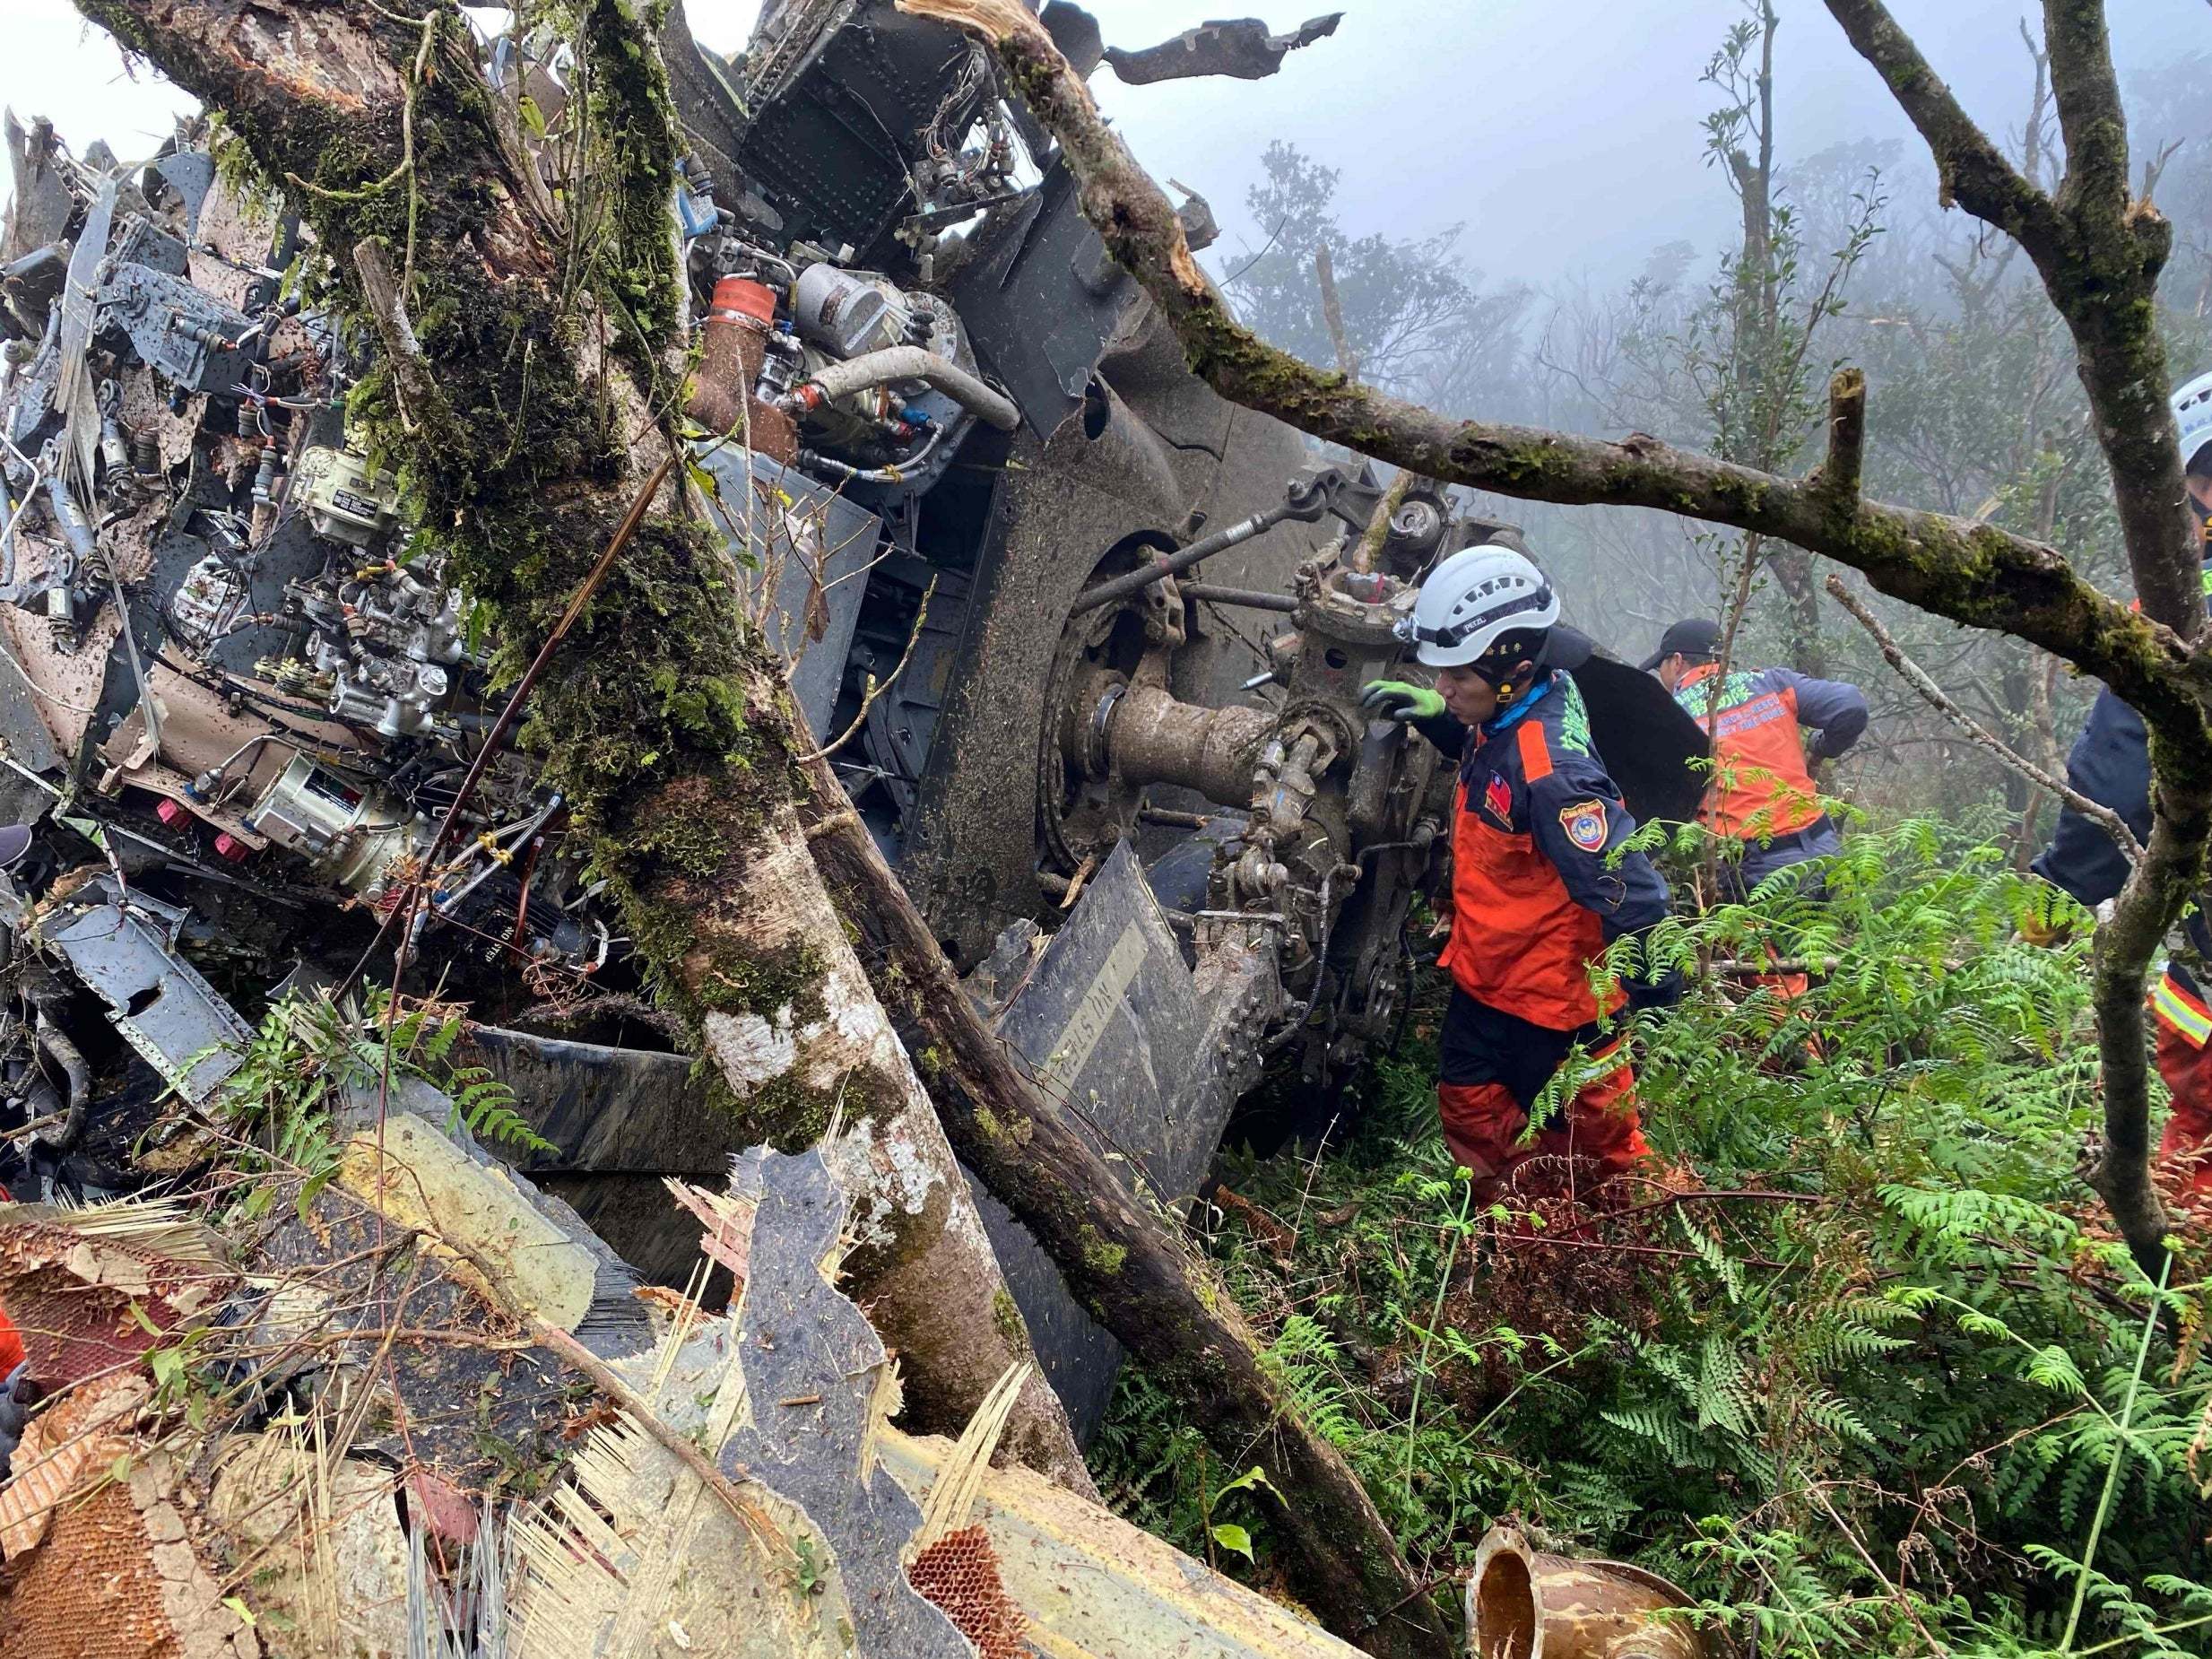 Rescuers search for survivors after a military Black Hawk helicopter crashed in mountains near Taipei, in Taiwan, killing eight people, 2 January, 2020.